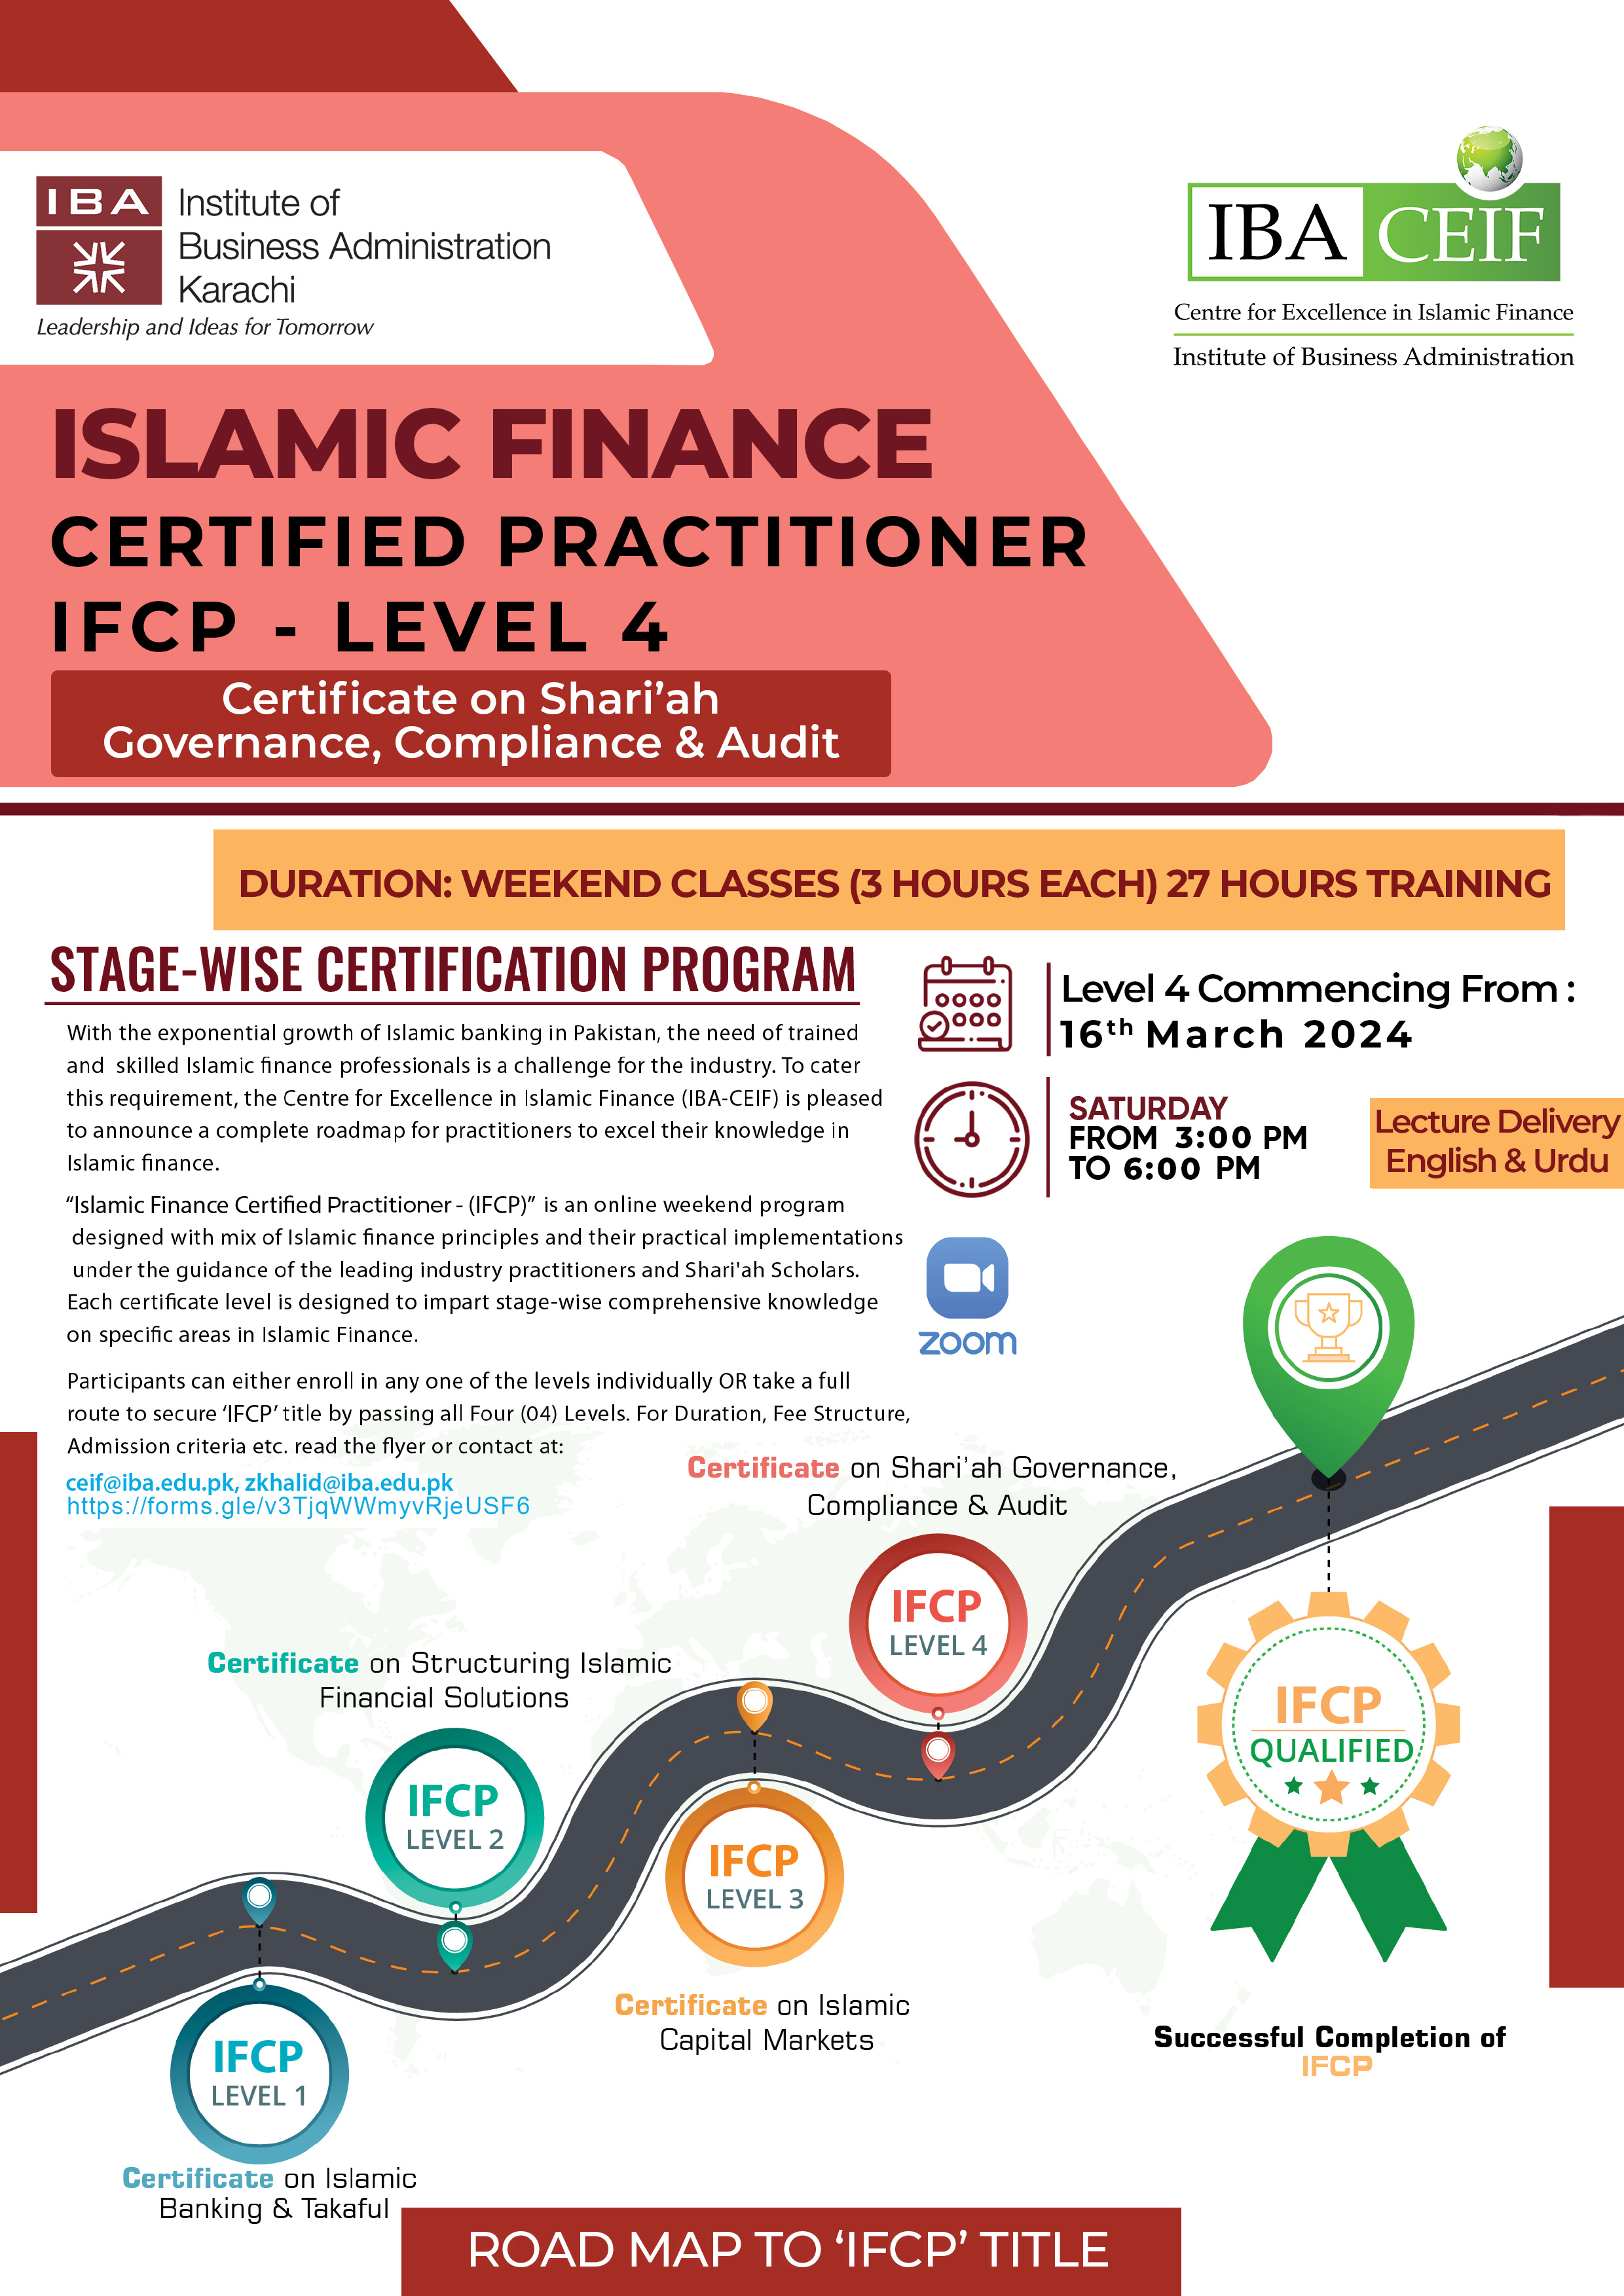 Islamic Finance Certified Practitioner